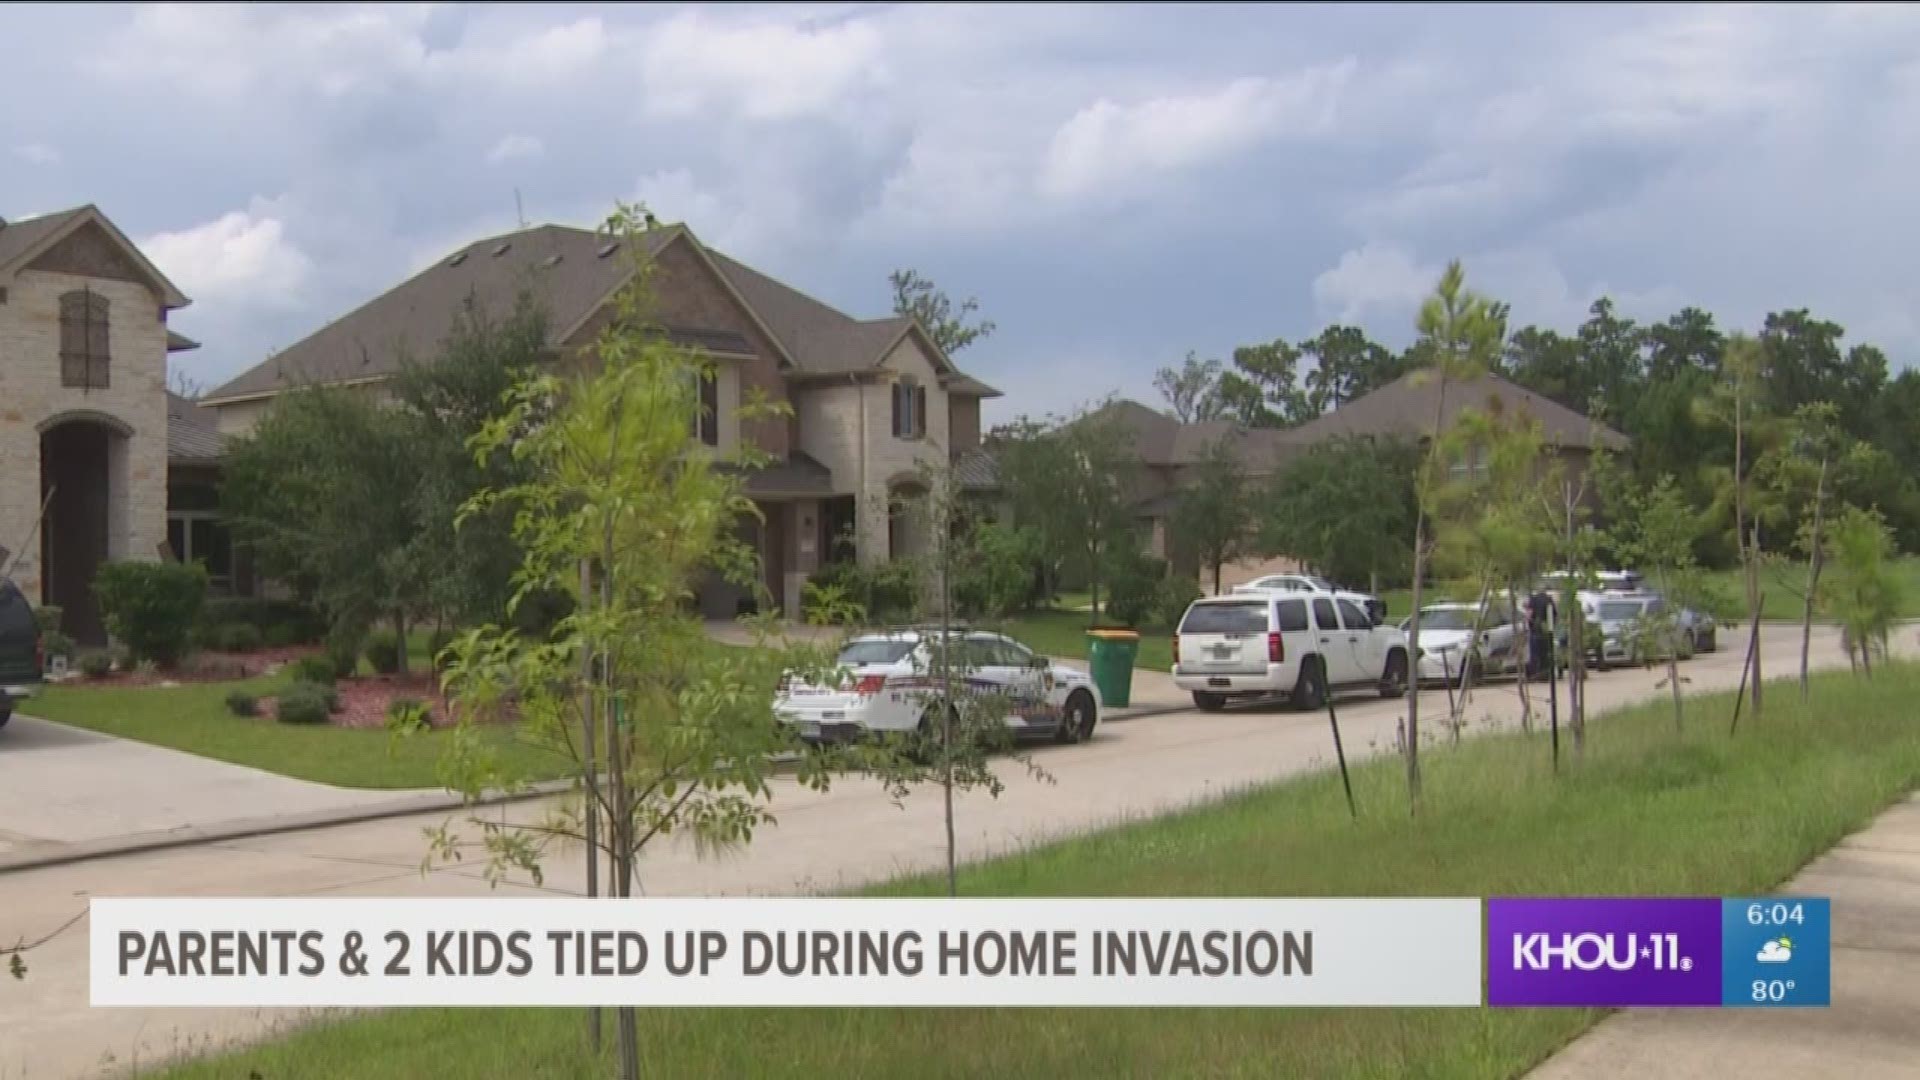 The search continues for four suspects who terrorized a Tomball family Thursday morning. The masked gunman tied up a couple and their two children during the home invasion robbery. The robbers left with some cash in a black Range Rover, according to the H